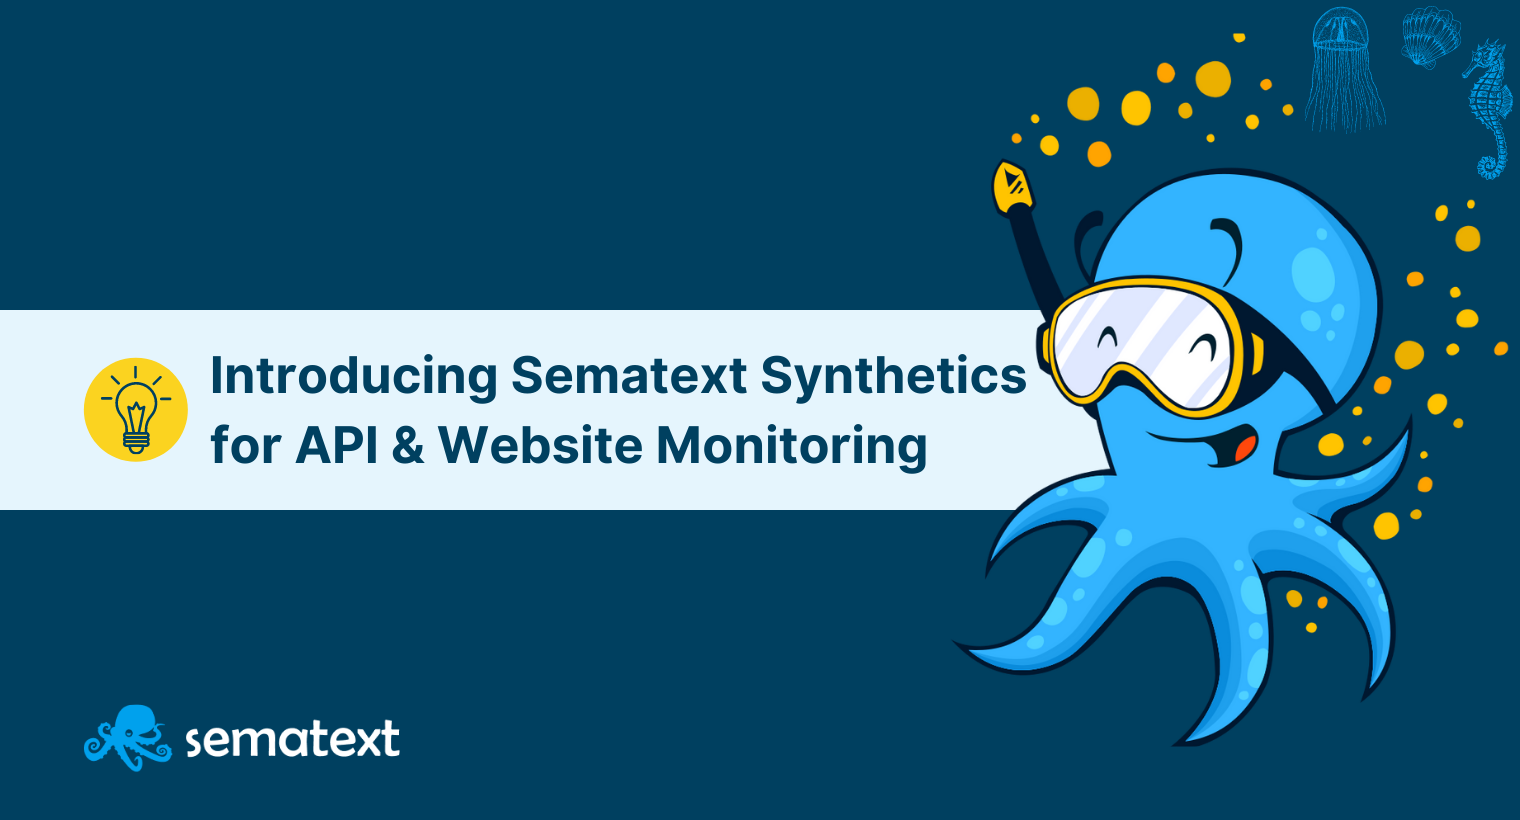 Introducing Sematext Synthetics for API & Website Monitoring